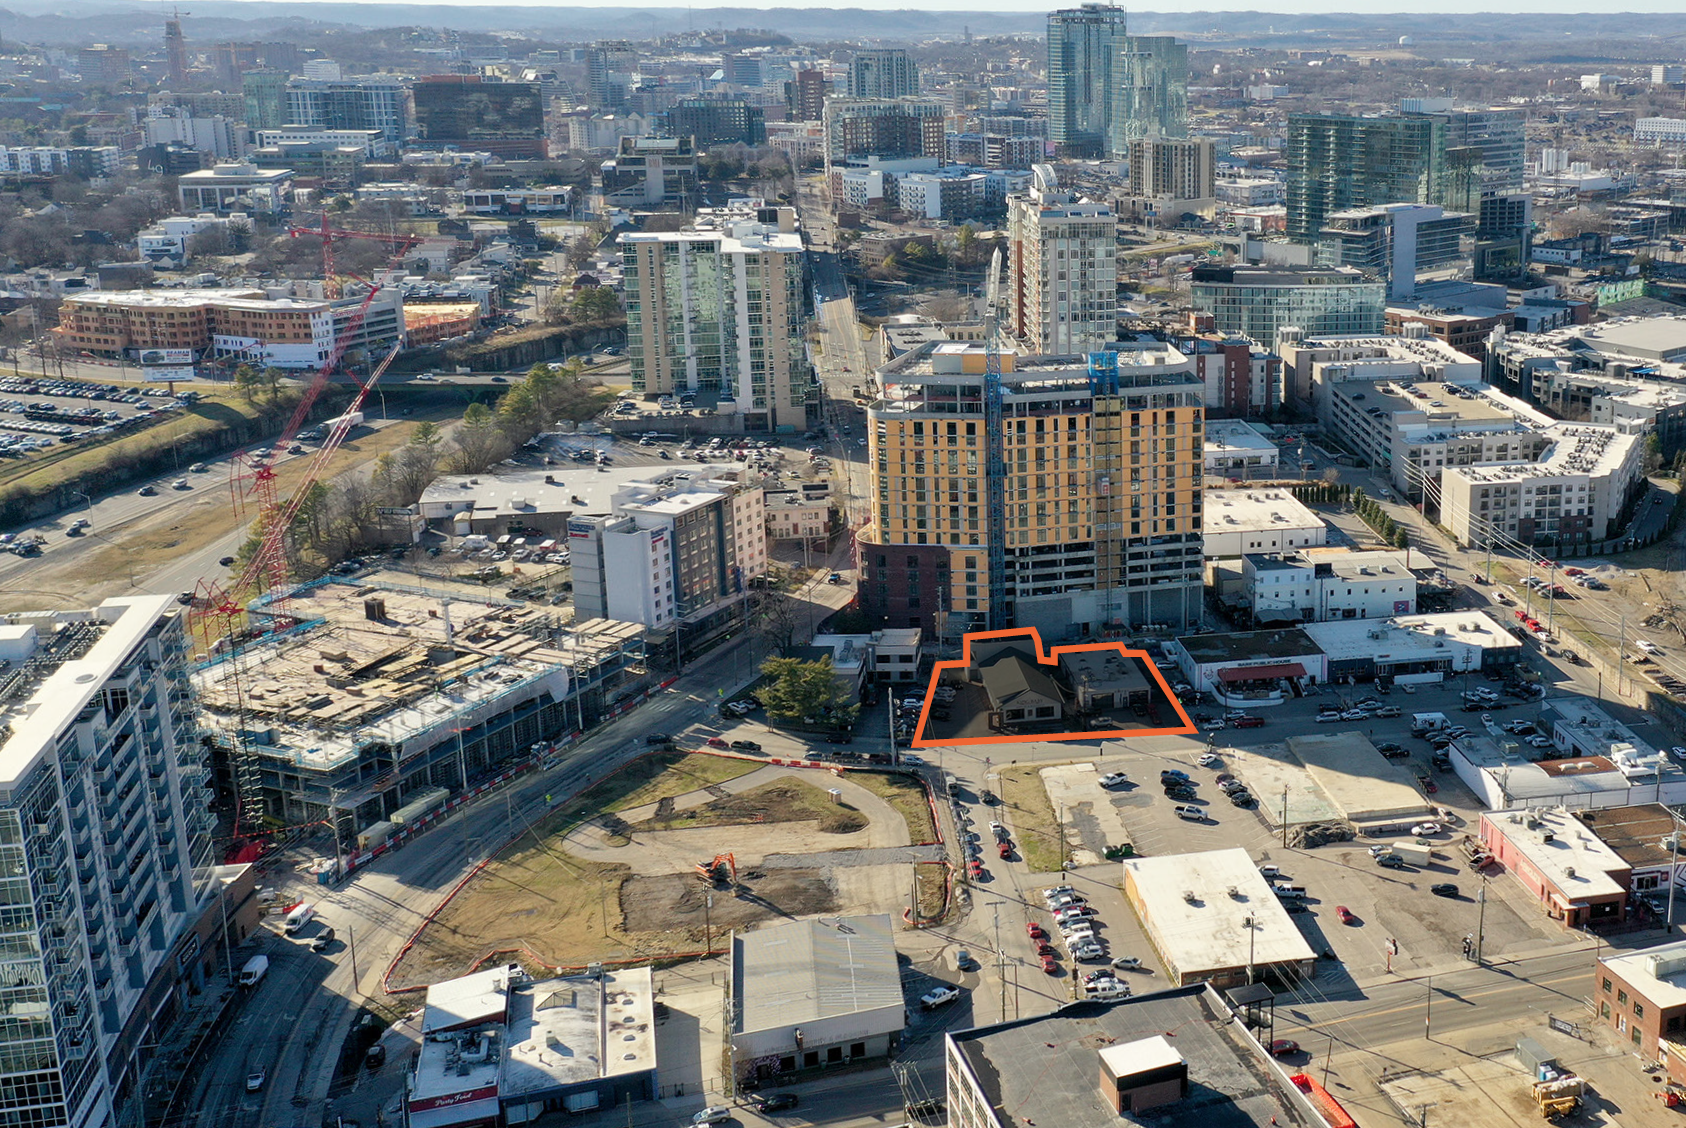 Avison Young Closes Sale of Two Redevelopment Parcels in Gulch South